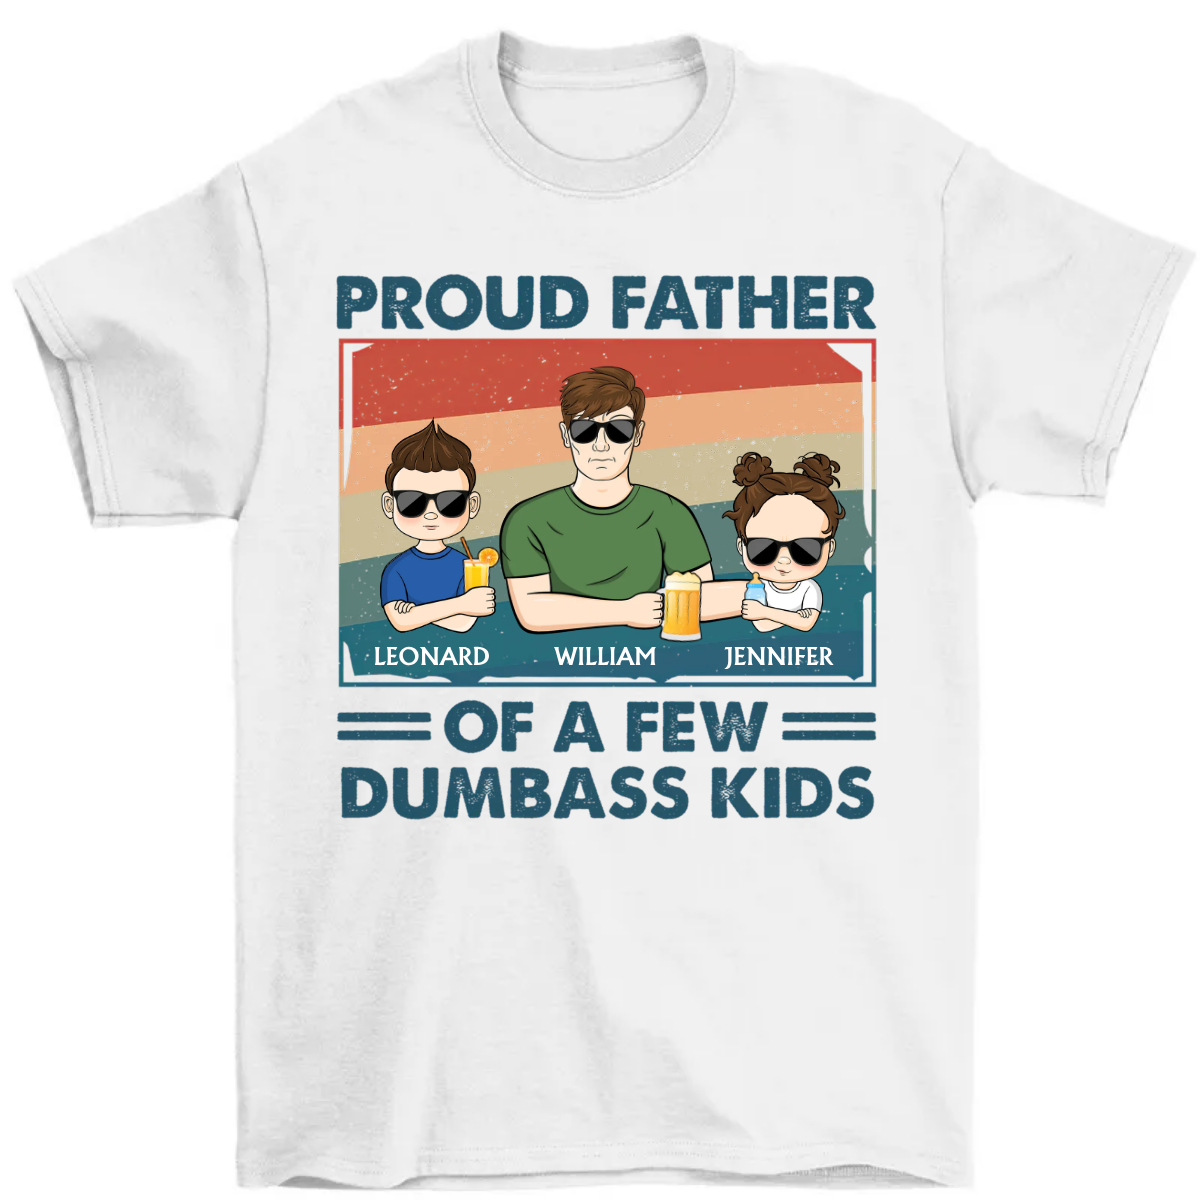 Proud Father Of A Few Kids - Funny Gift For Father, Dad, Grandpa - Personalized T Shirt